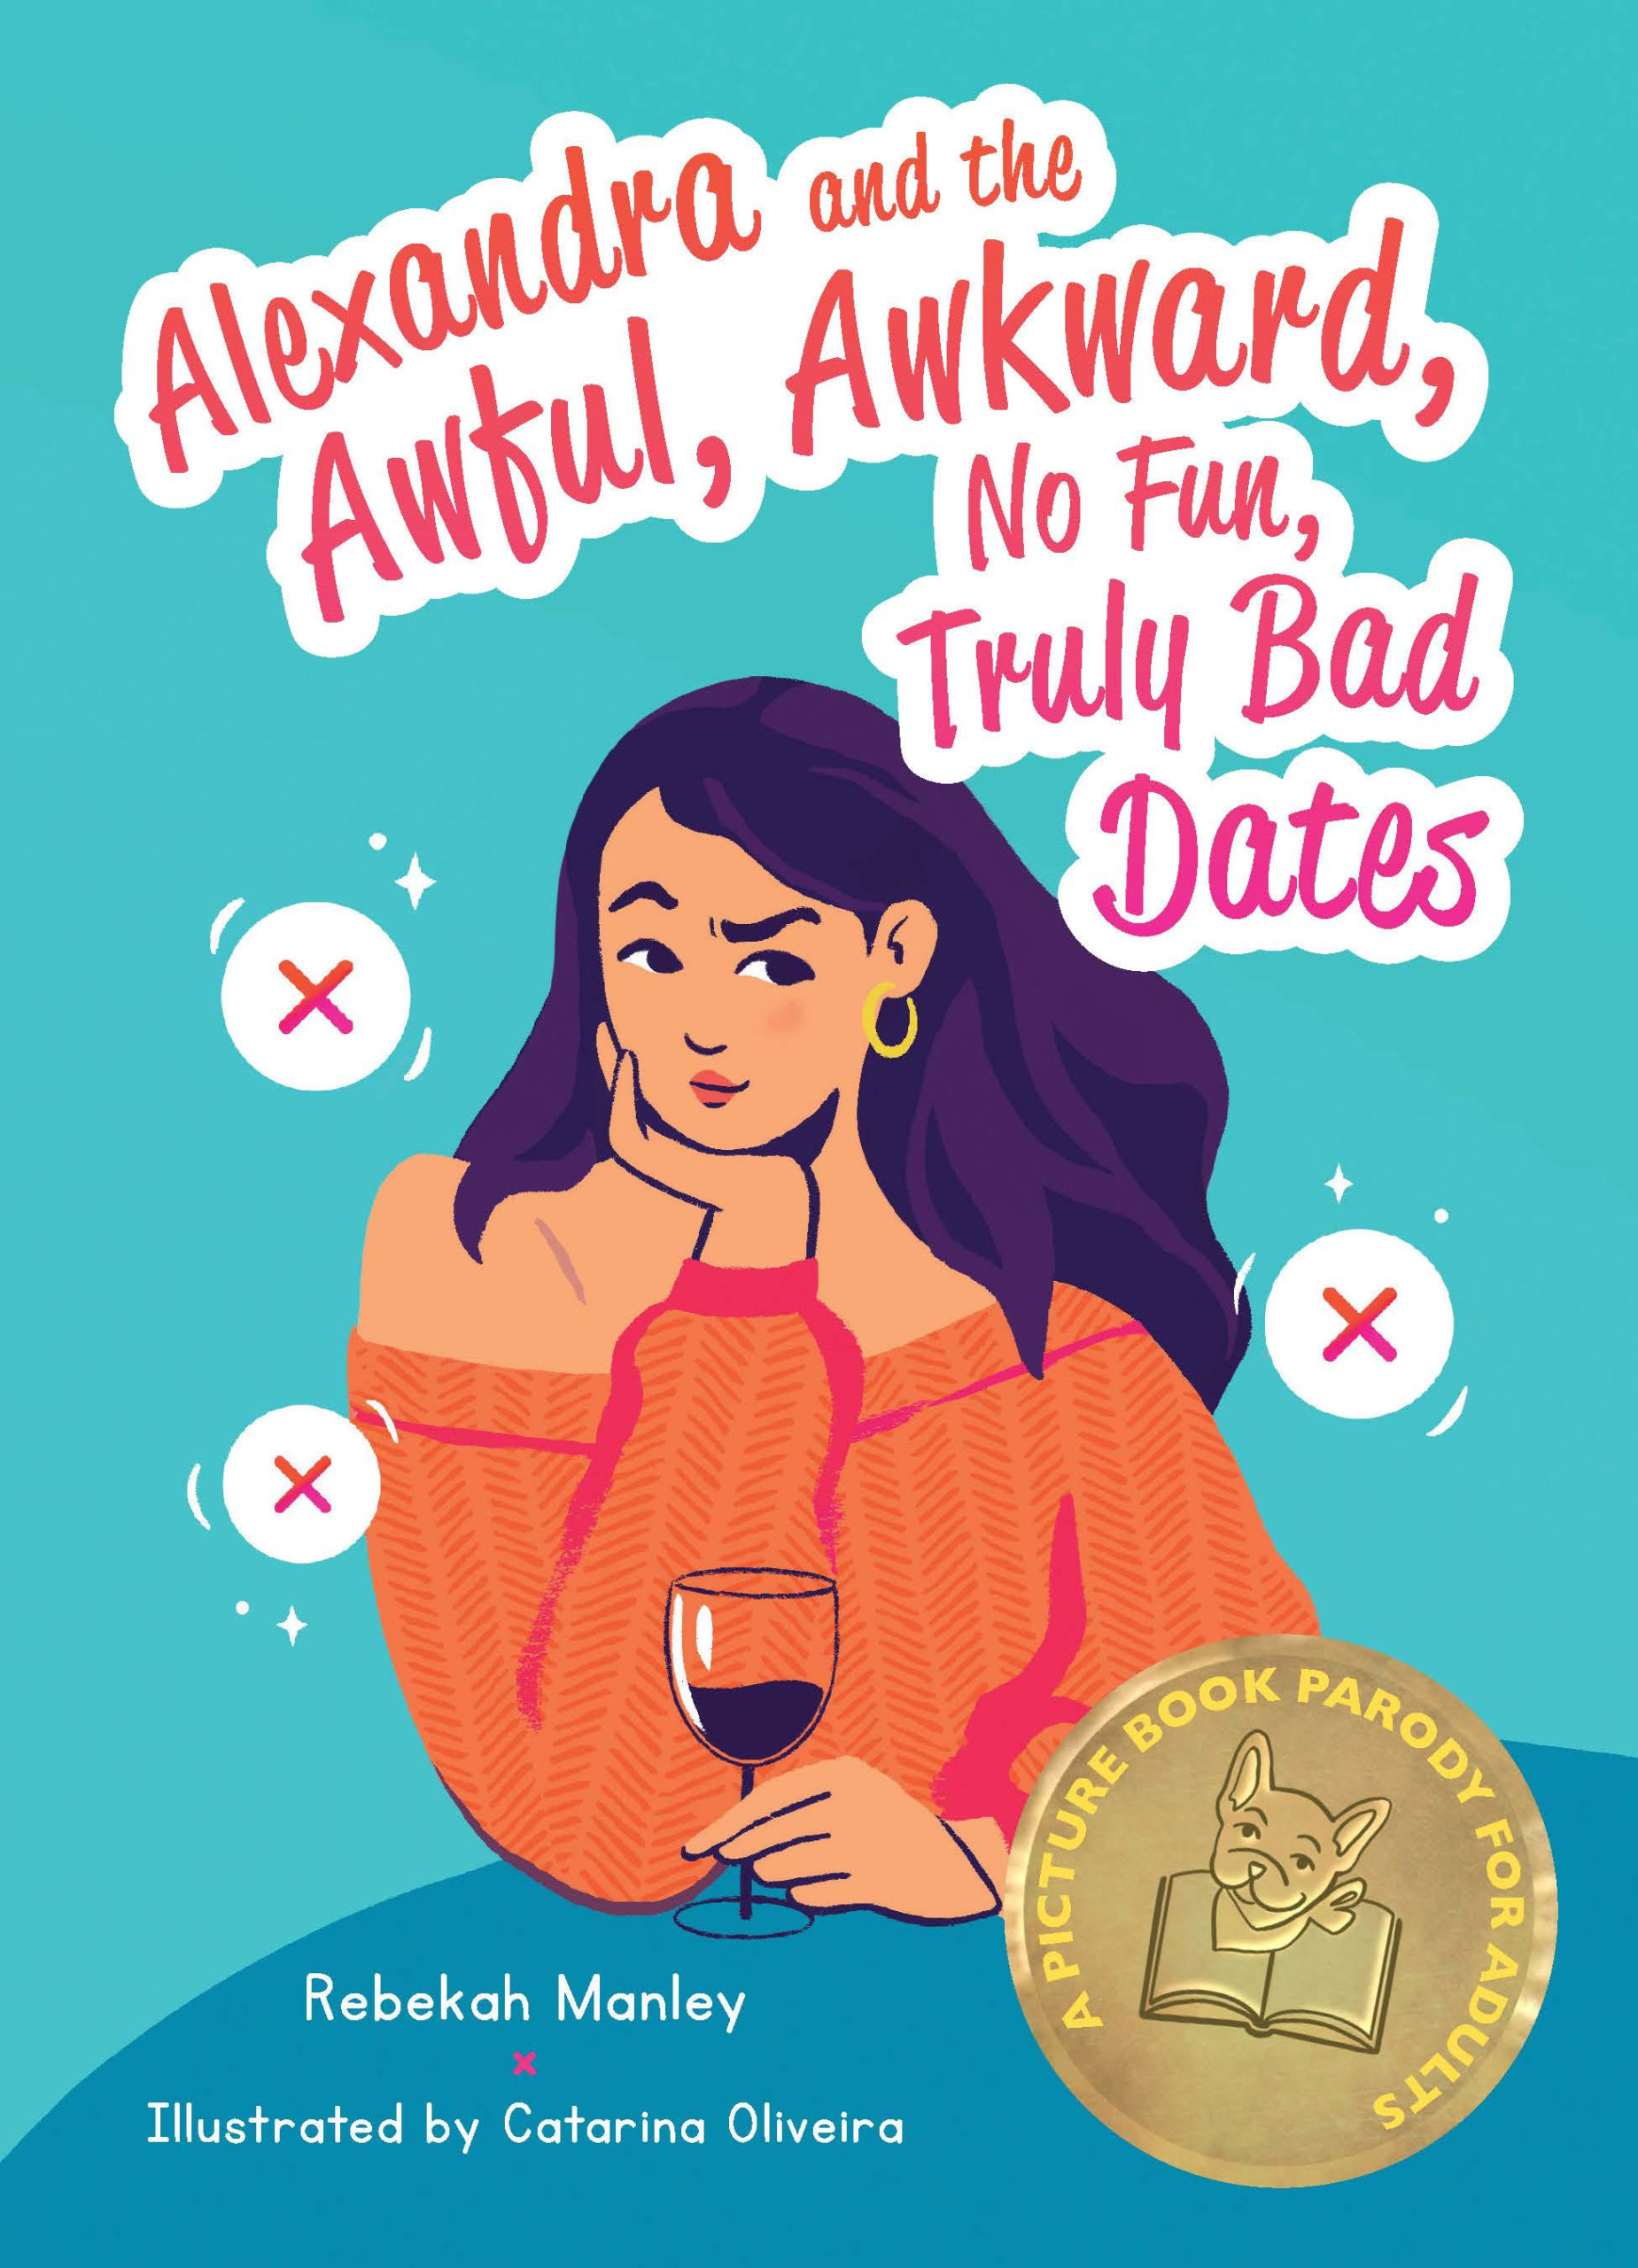 Alexandra and the Awful, Awkward, No Fun, Truly Bad Dates by Rebekah Manley